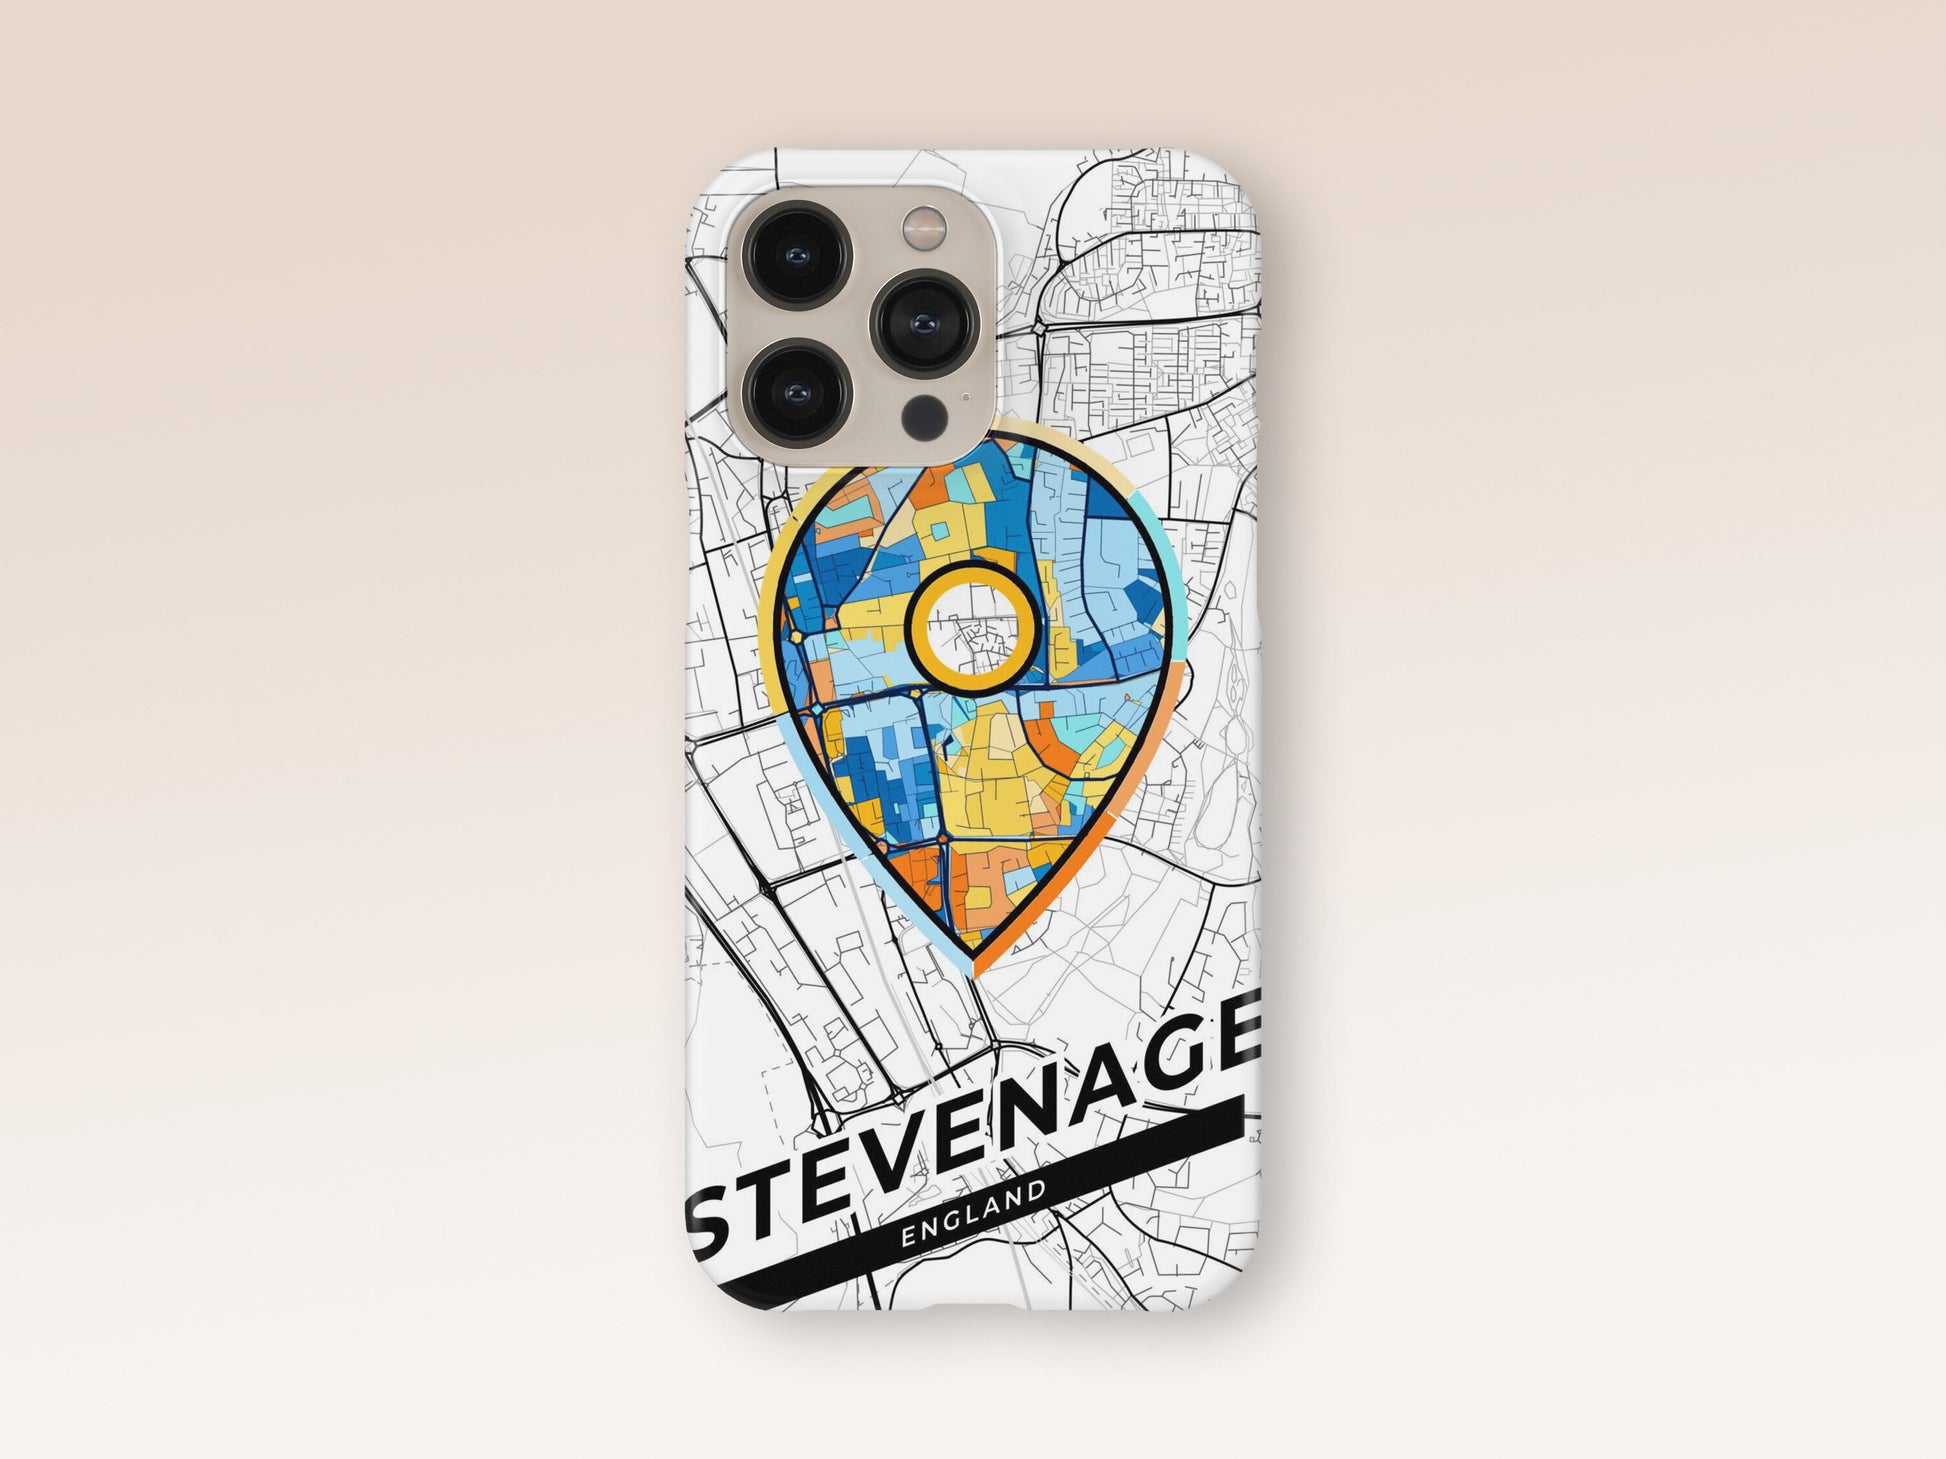 Stevenage England slim phone case with colorful icon 1